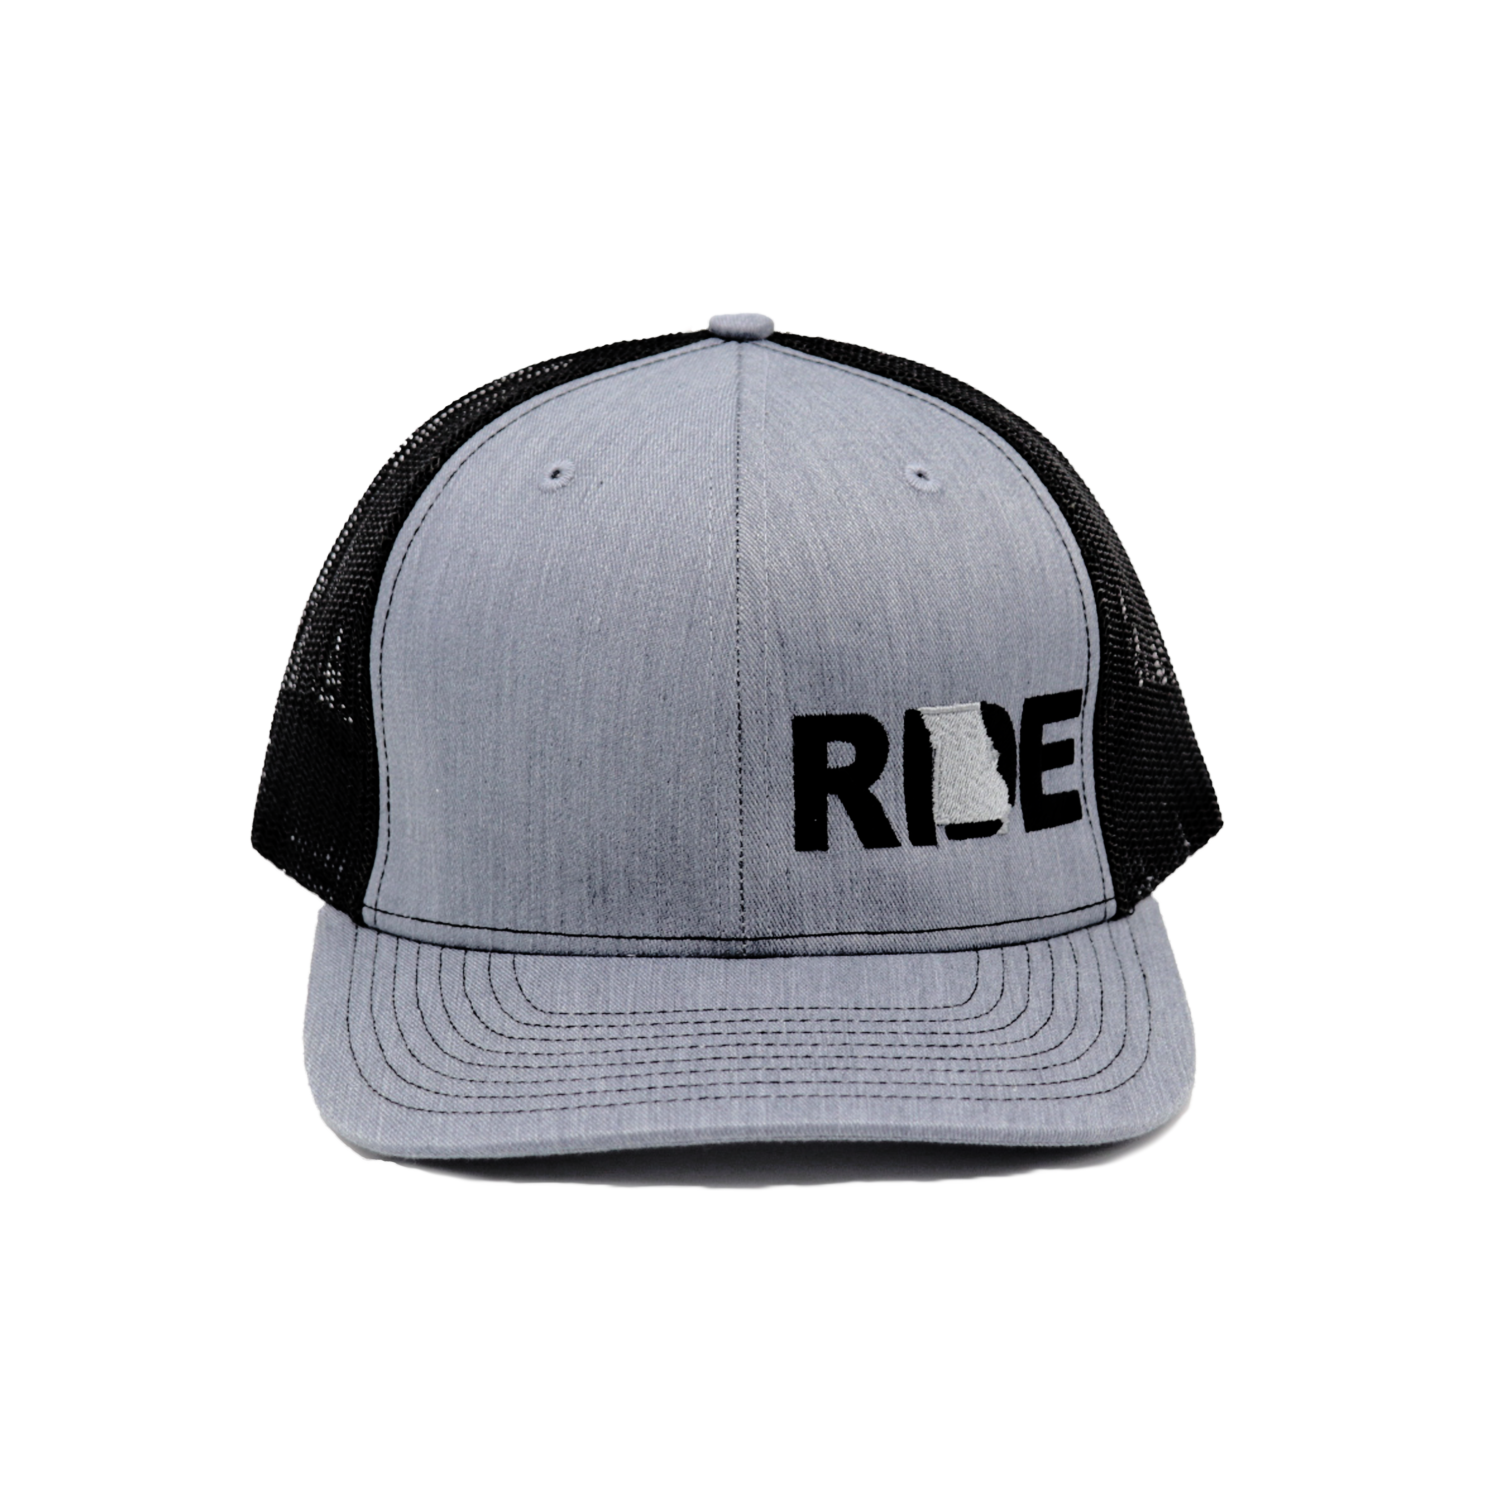 Ride Missouri Night Out Embroidered Snapback Trucker Hat Heather Gray/Black